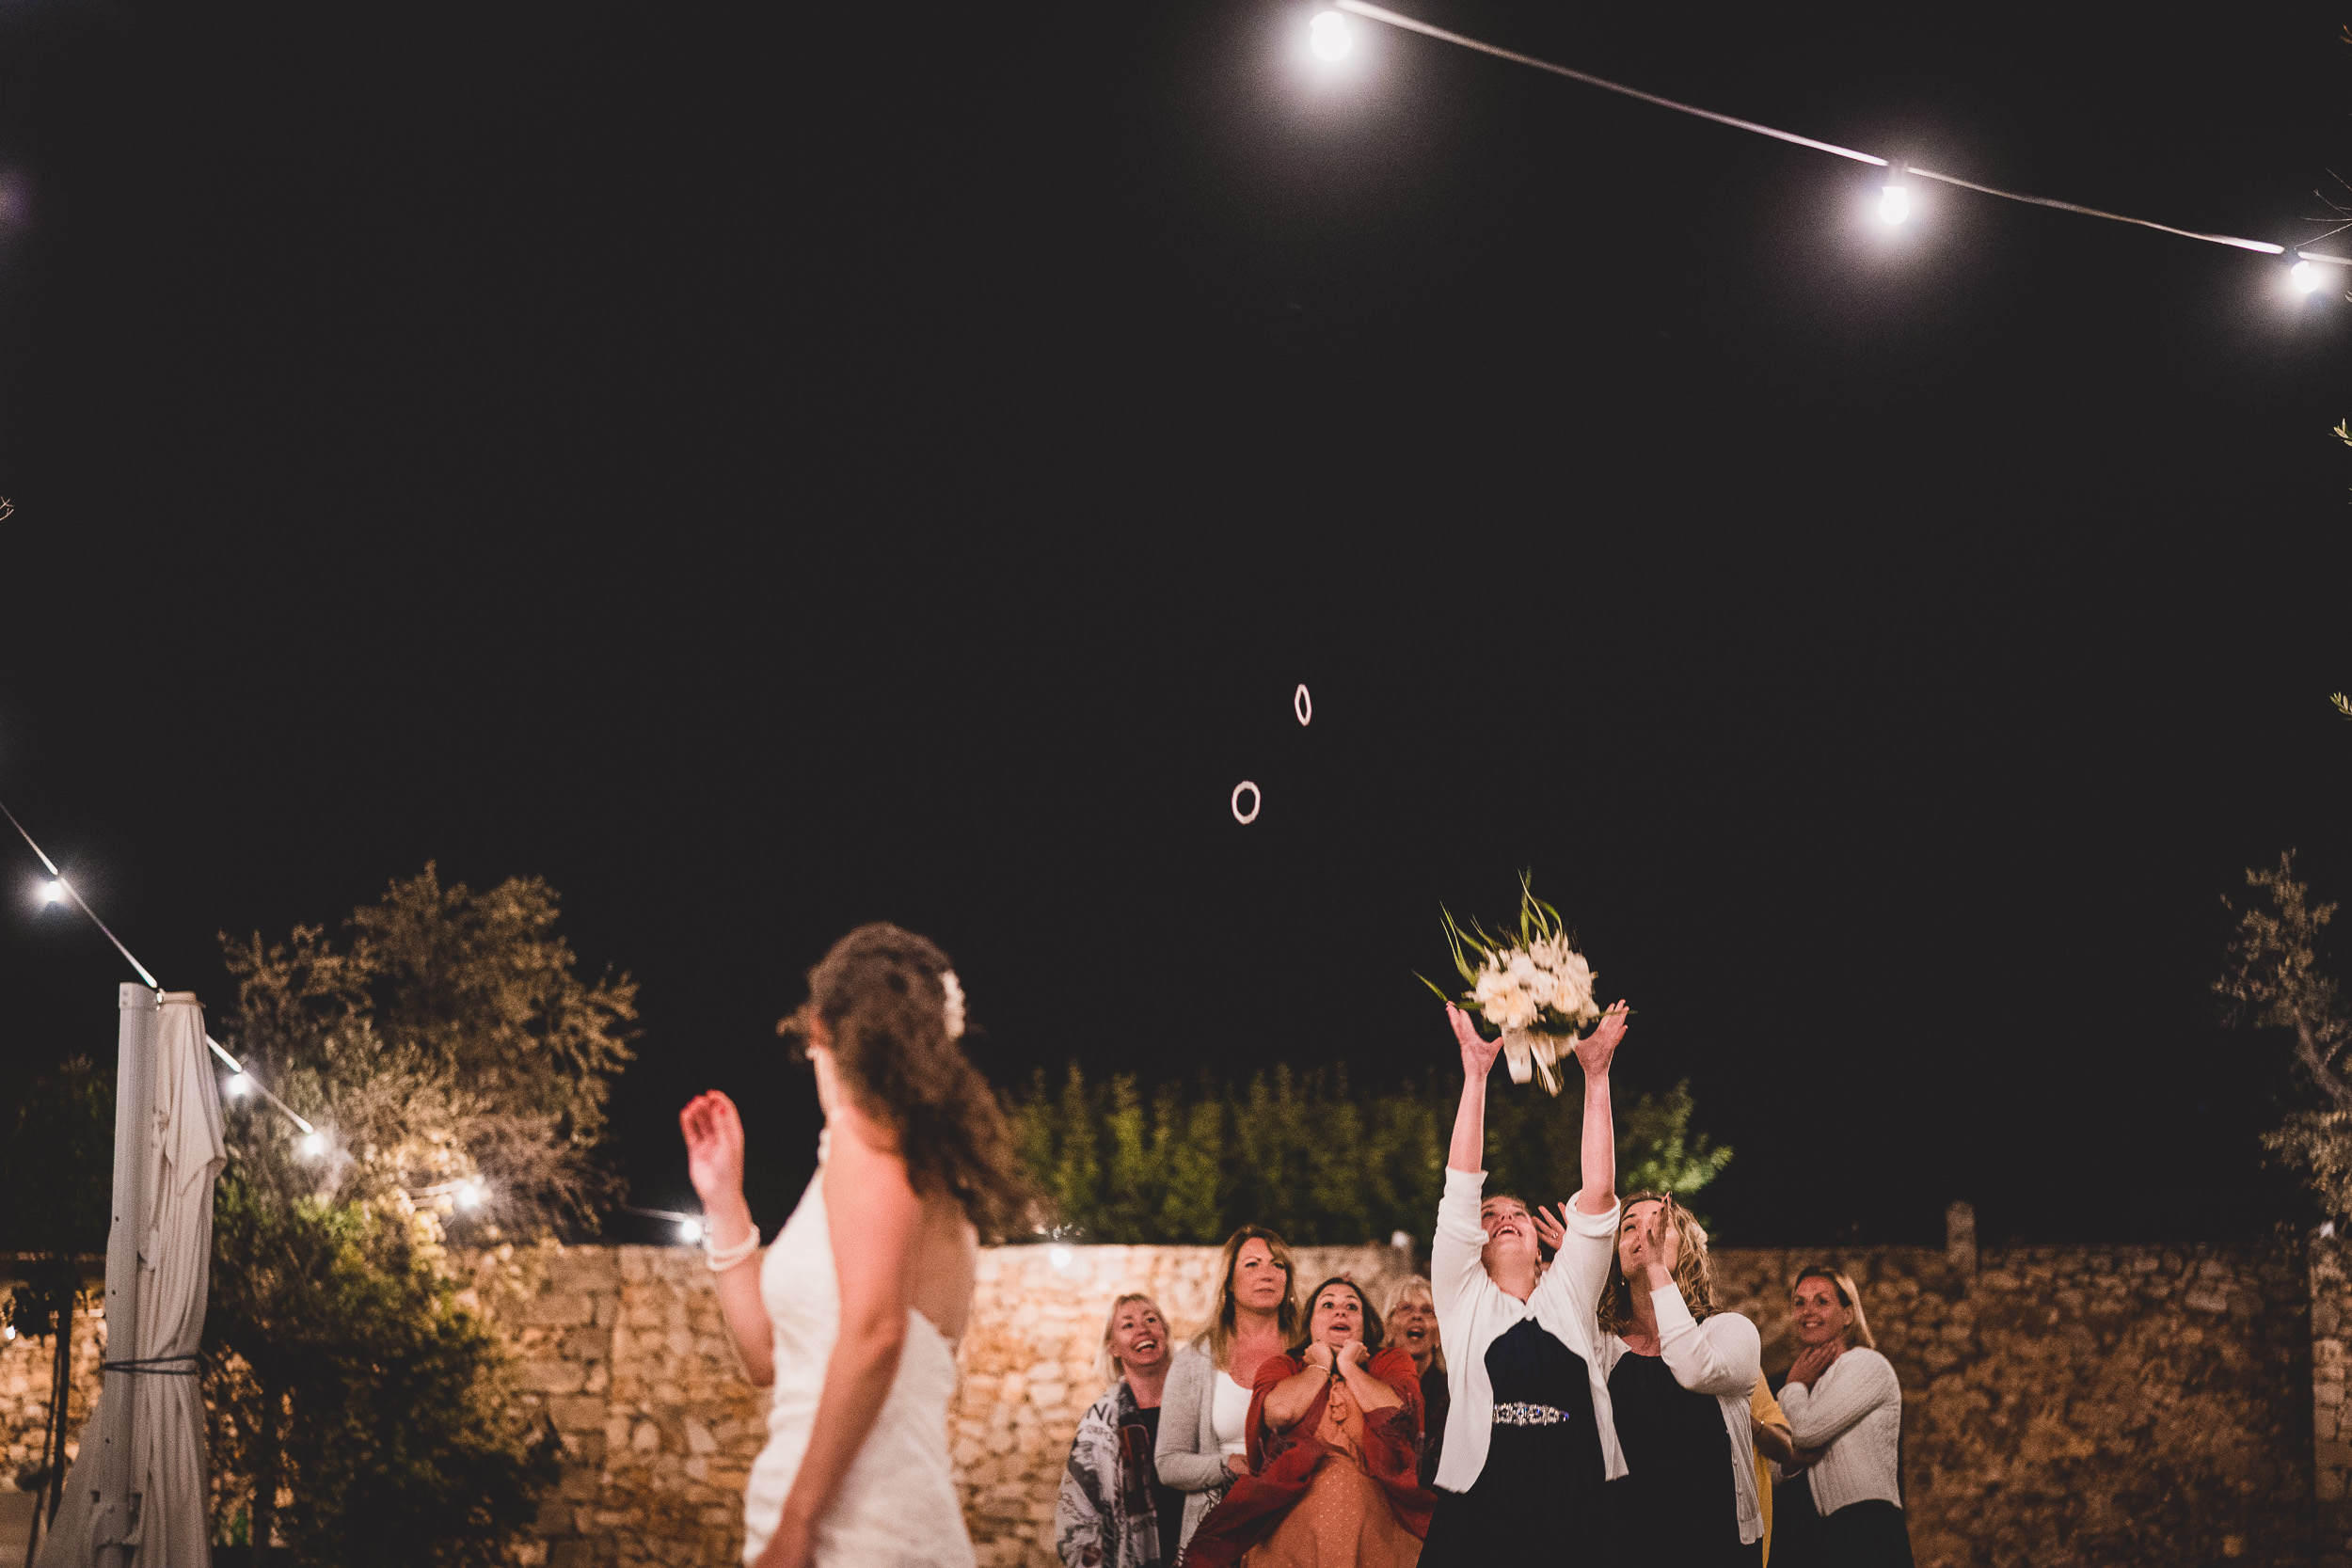 A wedding photo captures the bride and groom joyfully throwing confetti in the air at night.